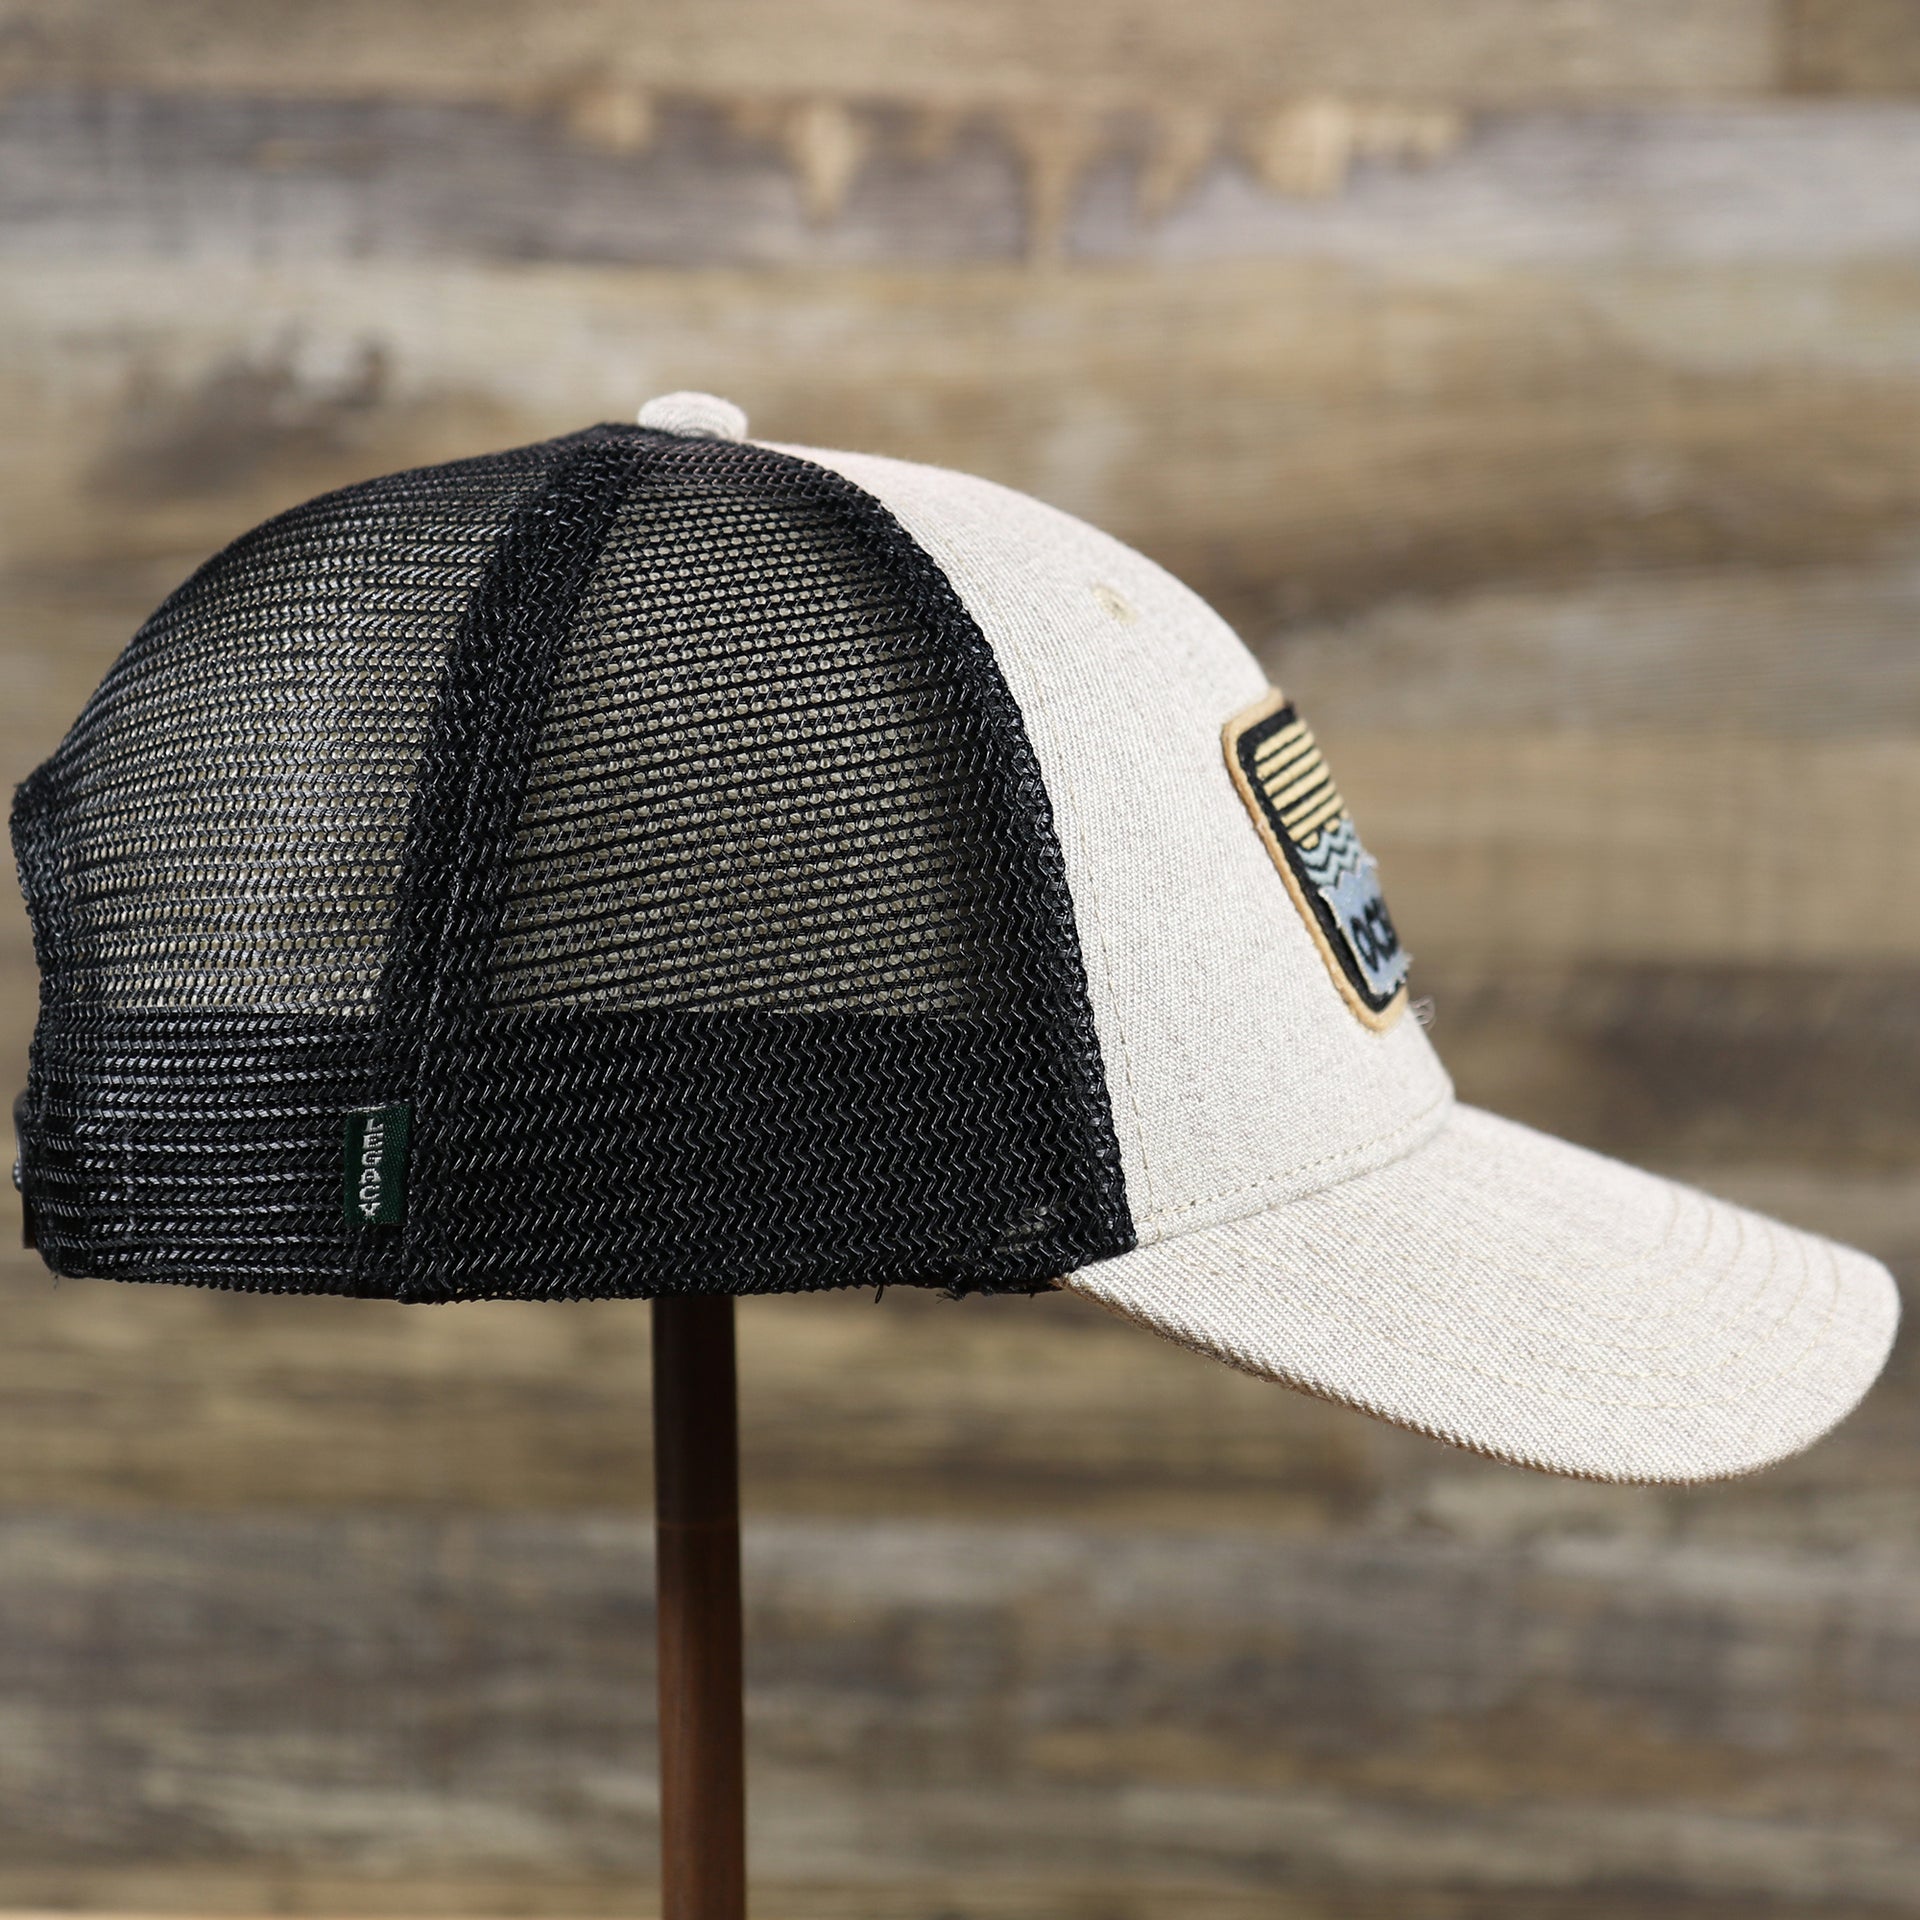 The wearer's right on the New Jersey Ocean City Sunset Mesh Back Trucker Hat | Heather Tan And Black Mesh Trucker Hat